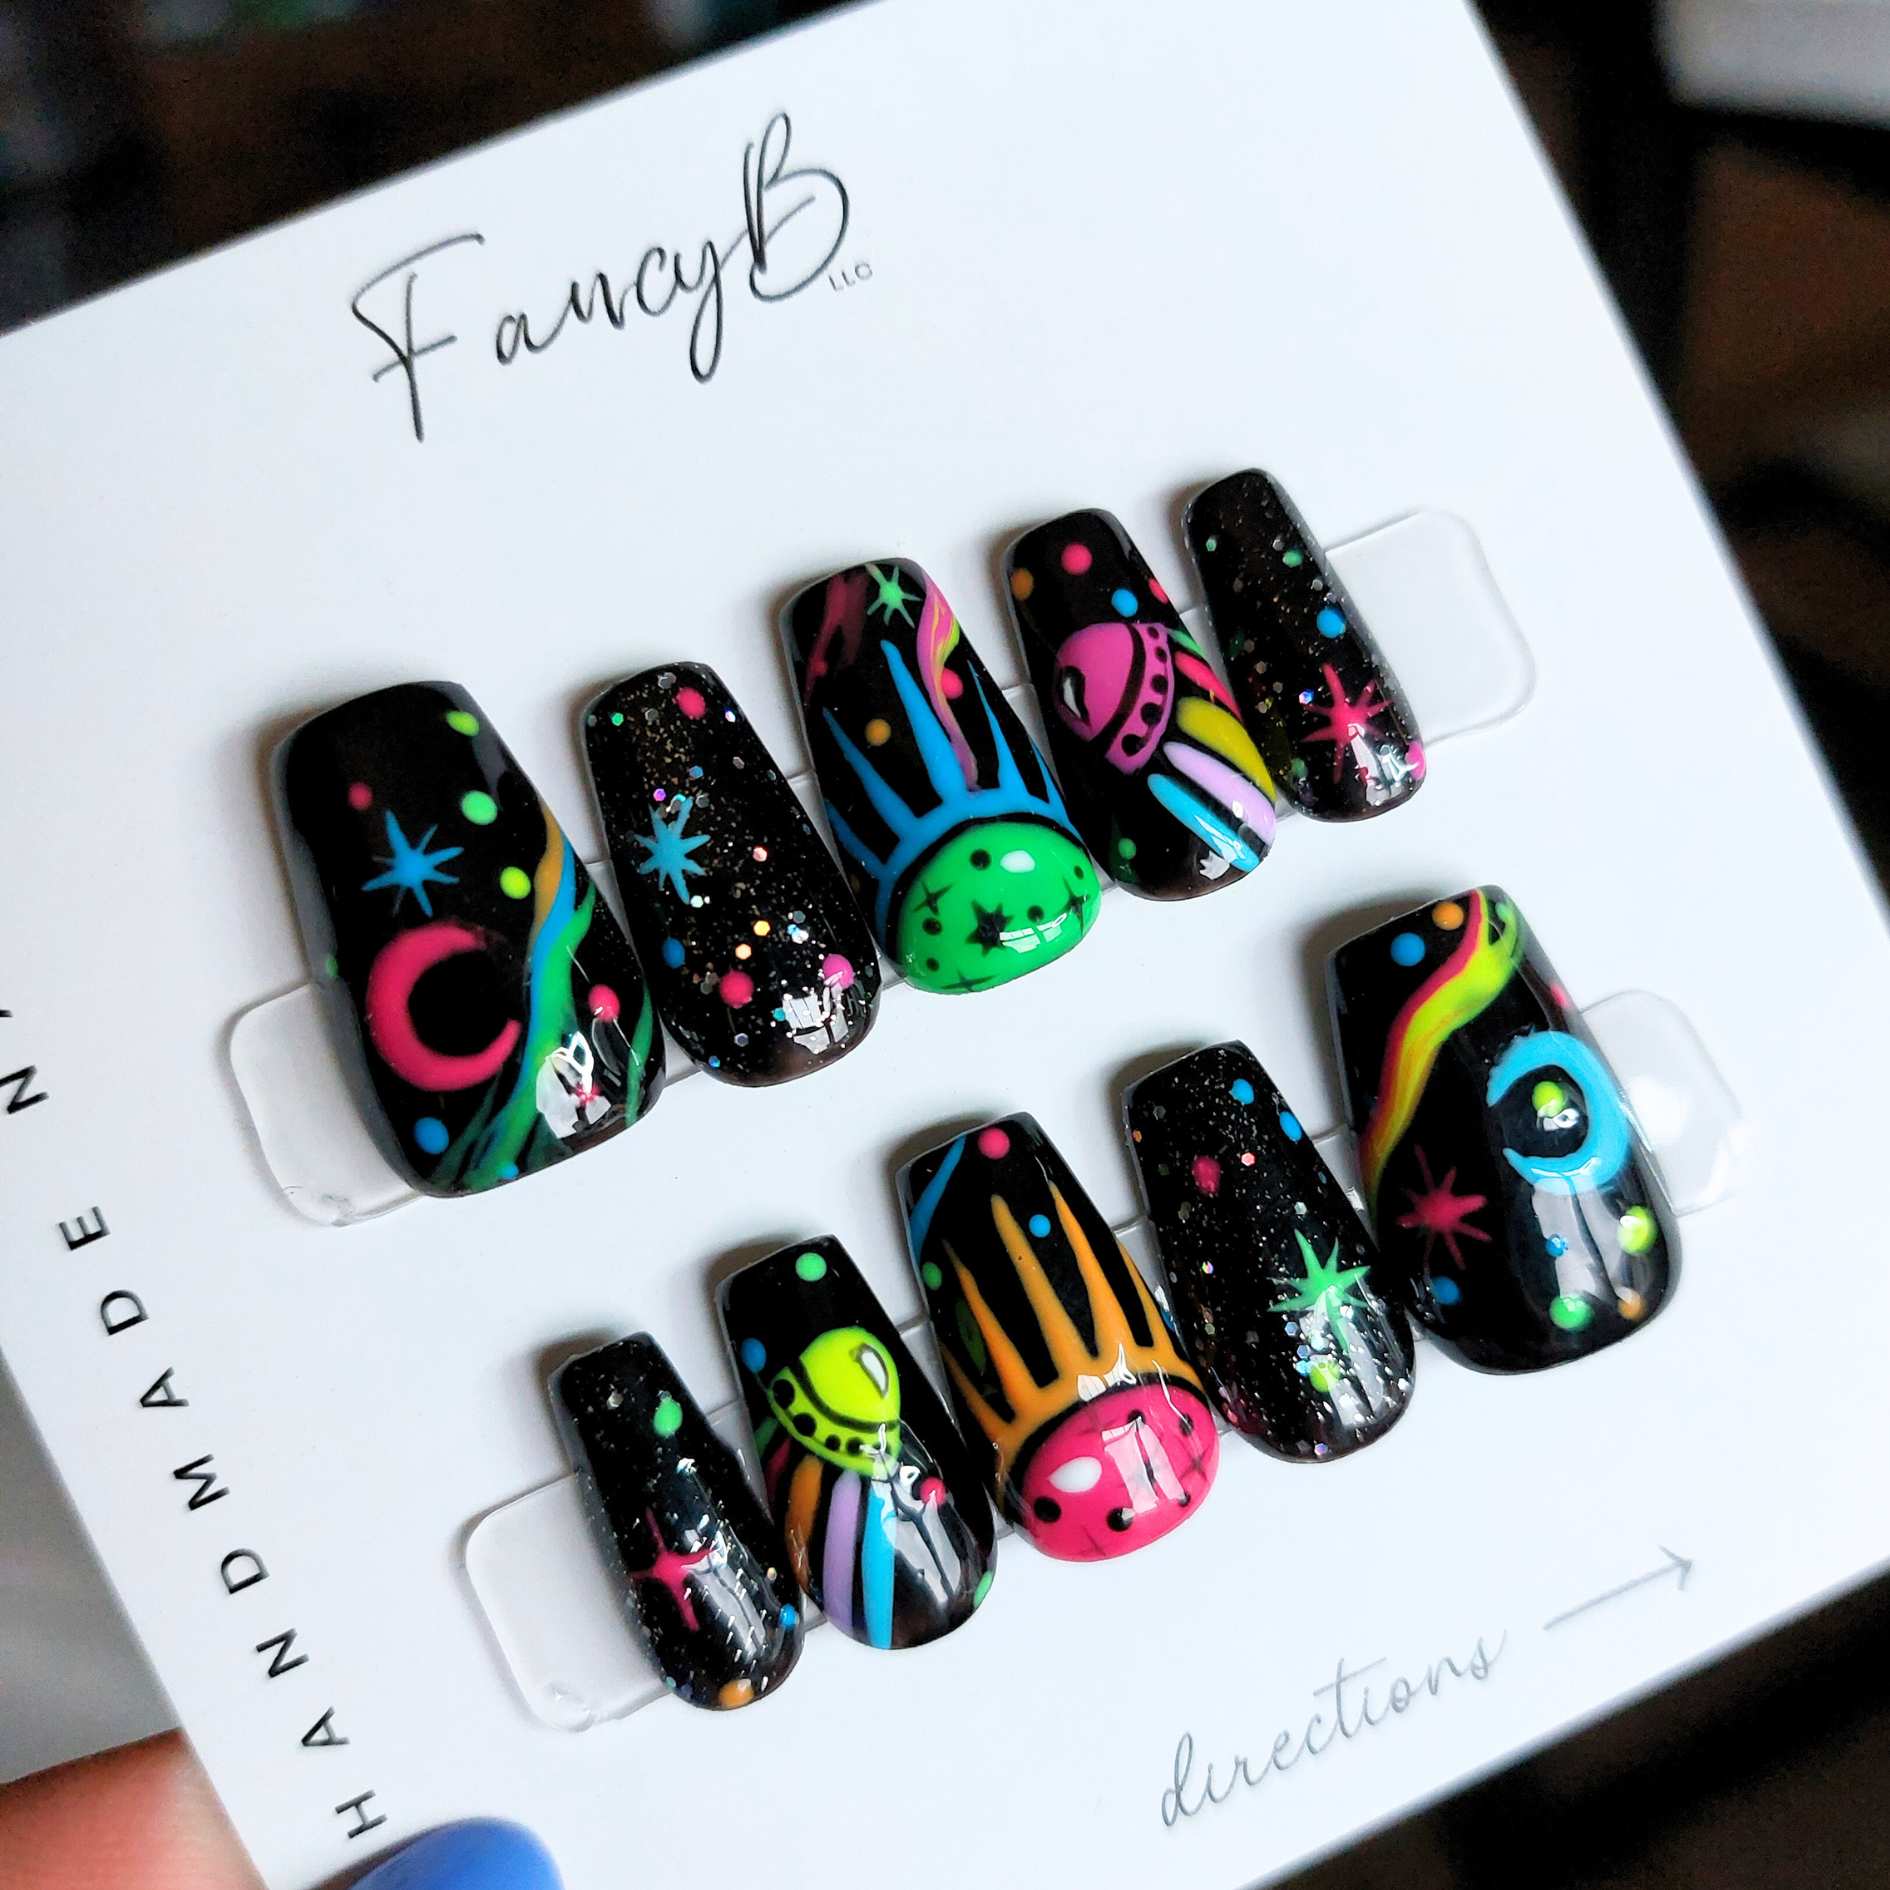 custom psychedelic nails, trippy space theme with UFOs, moons, stars, saucers, and colorful designs on short coffin nails from fancyb handmade nails.